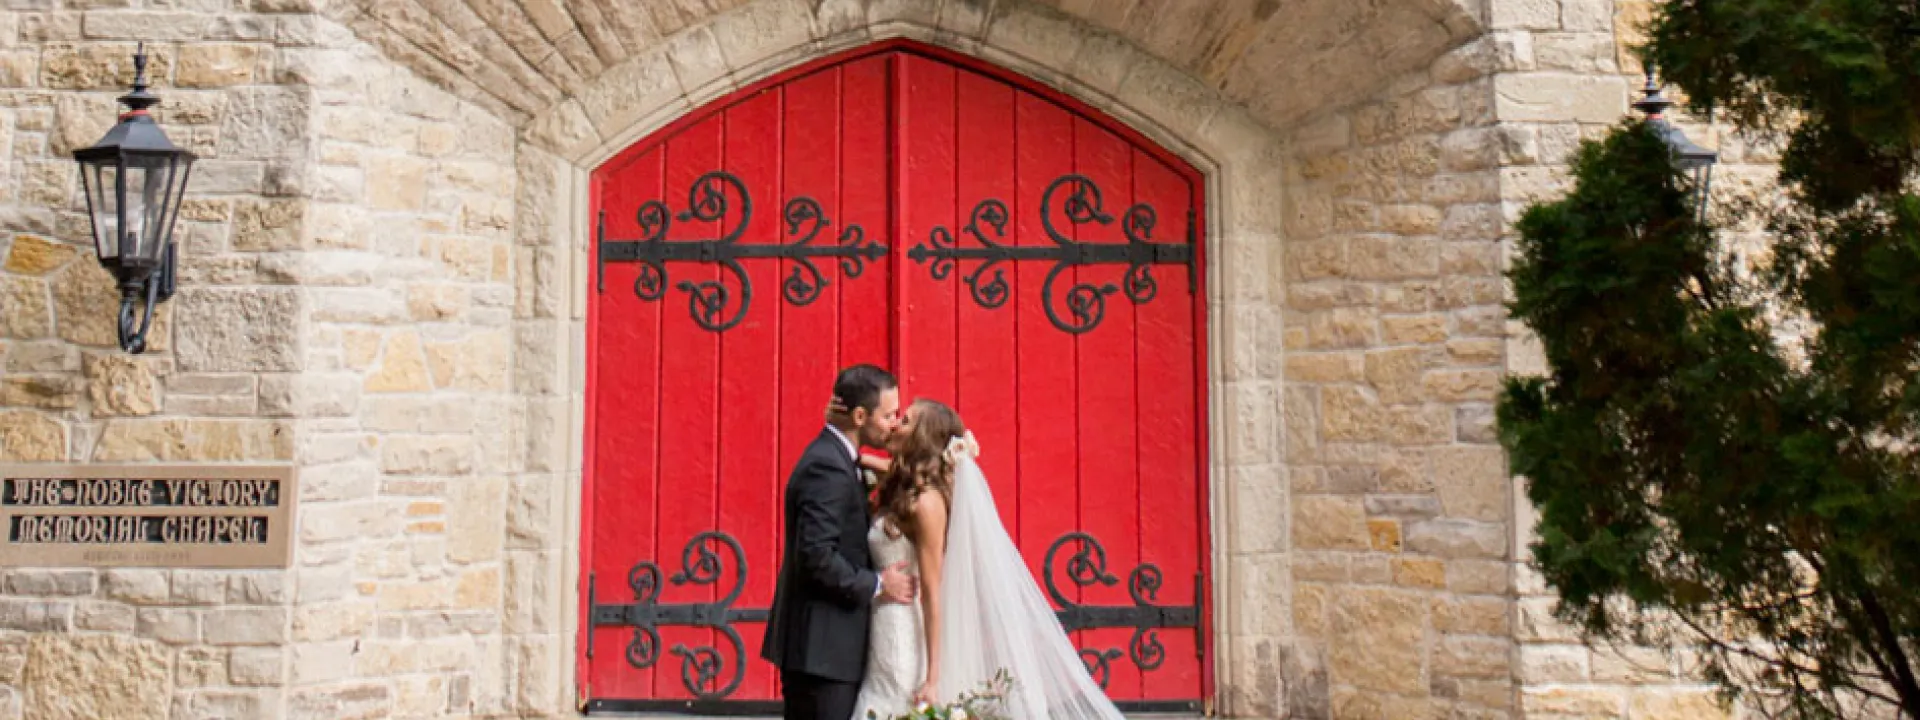 The couple embraces outside the historic stone church at St. John's Military Academy